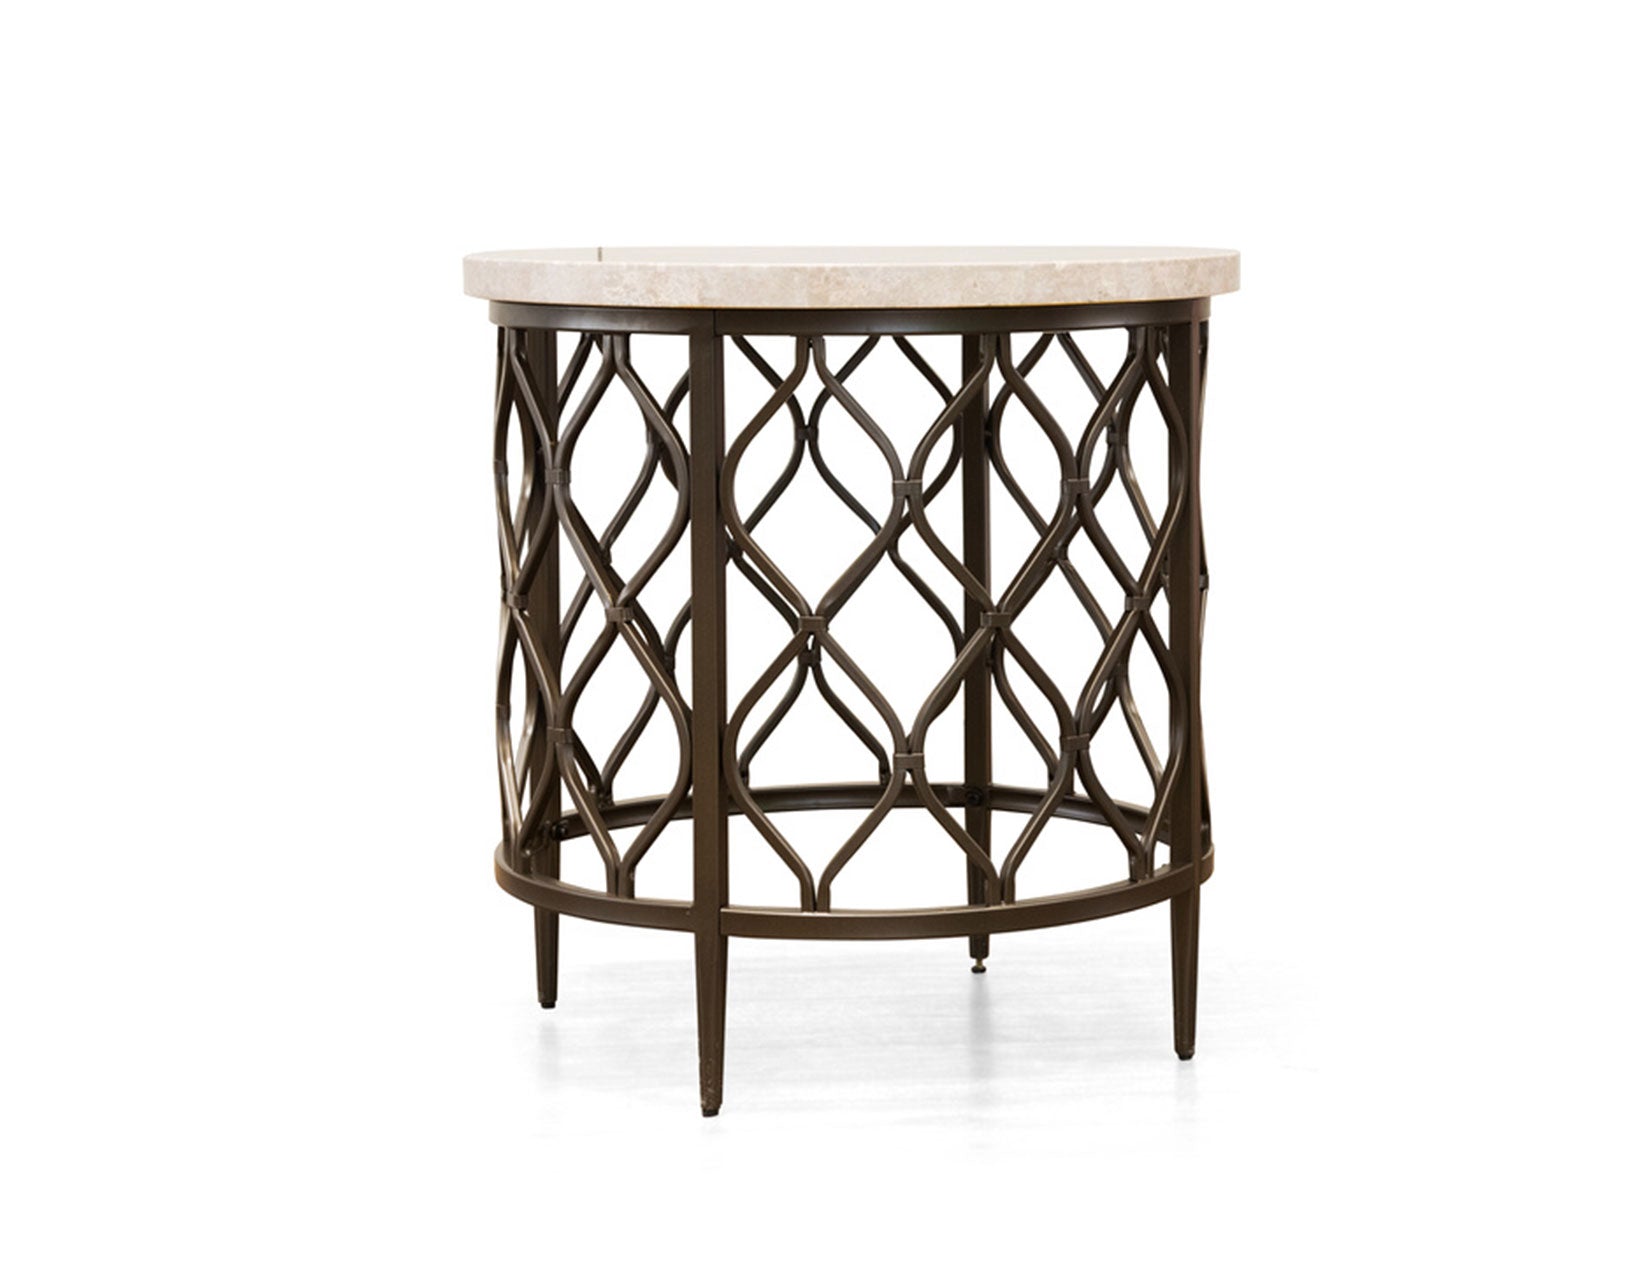 Steve Silver Roland Round White Stone Top with Bronze Metal Base End Table